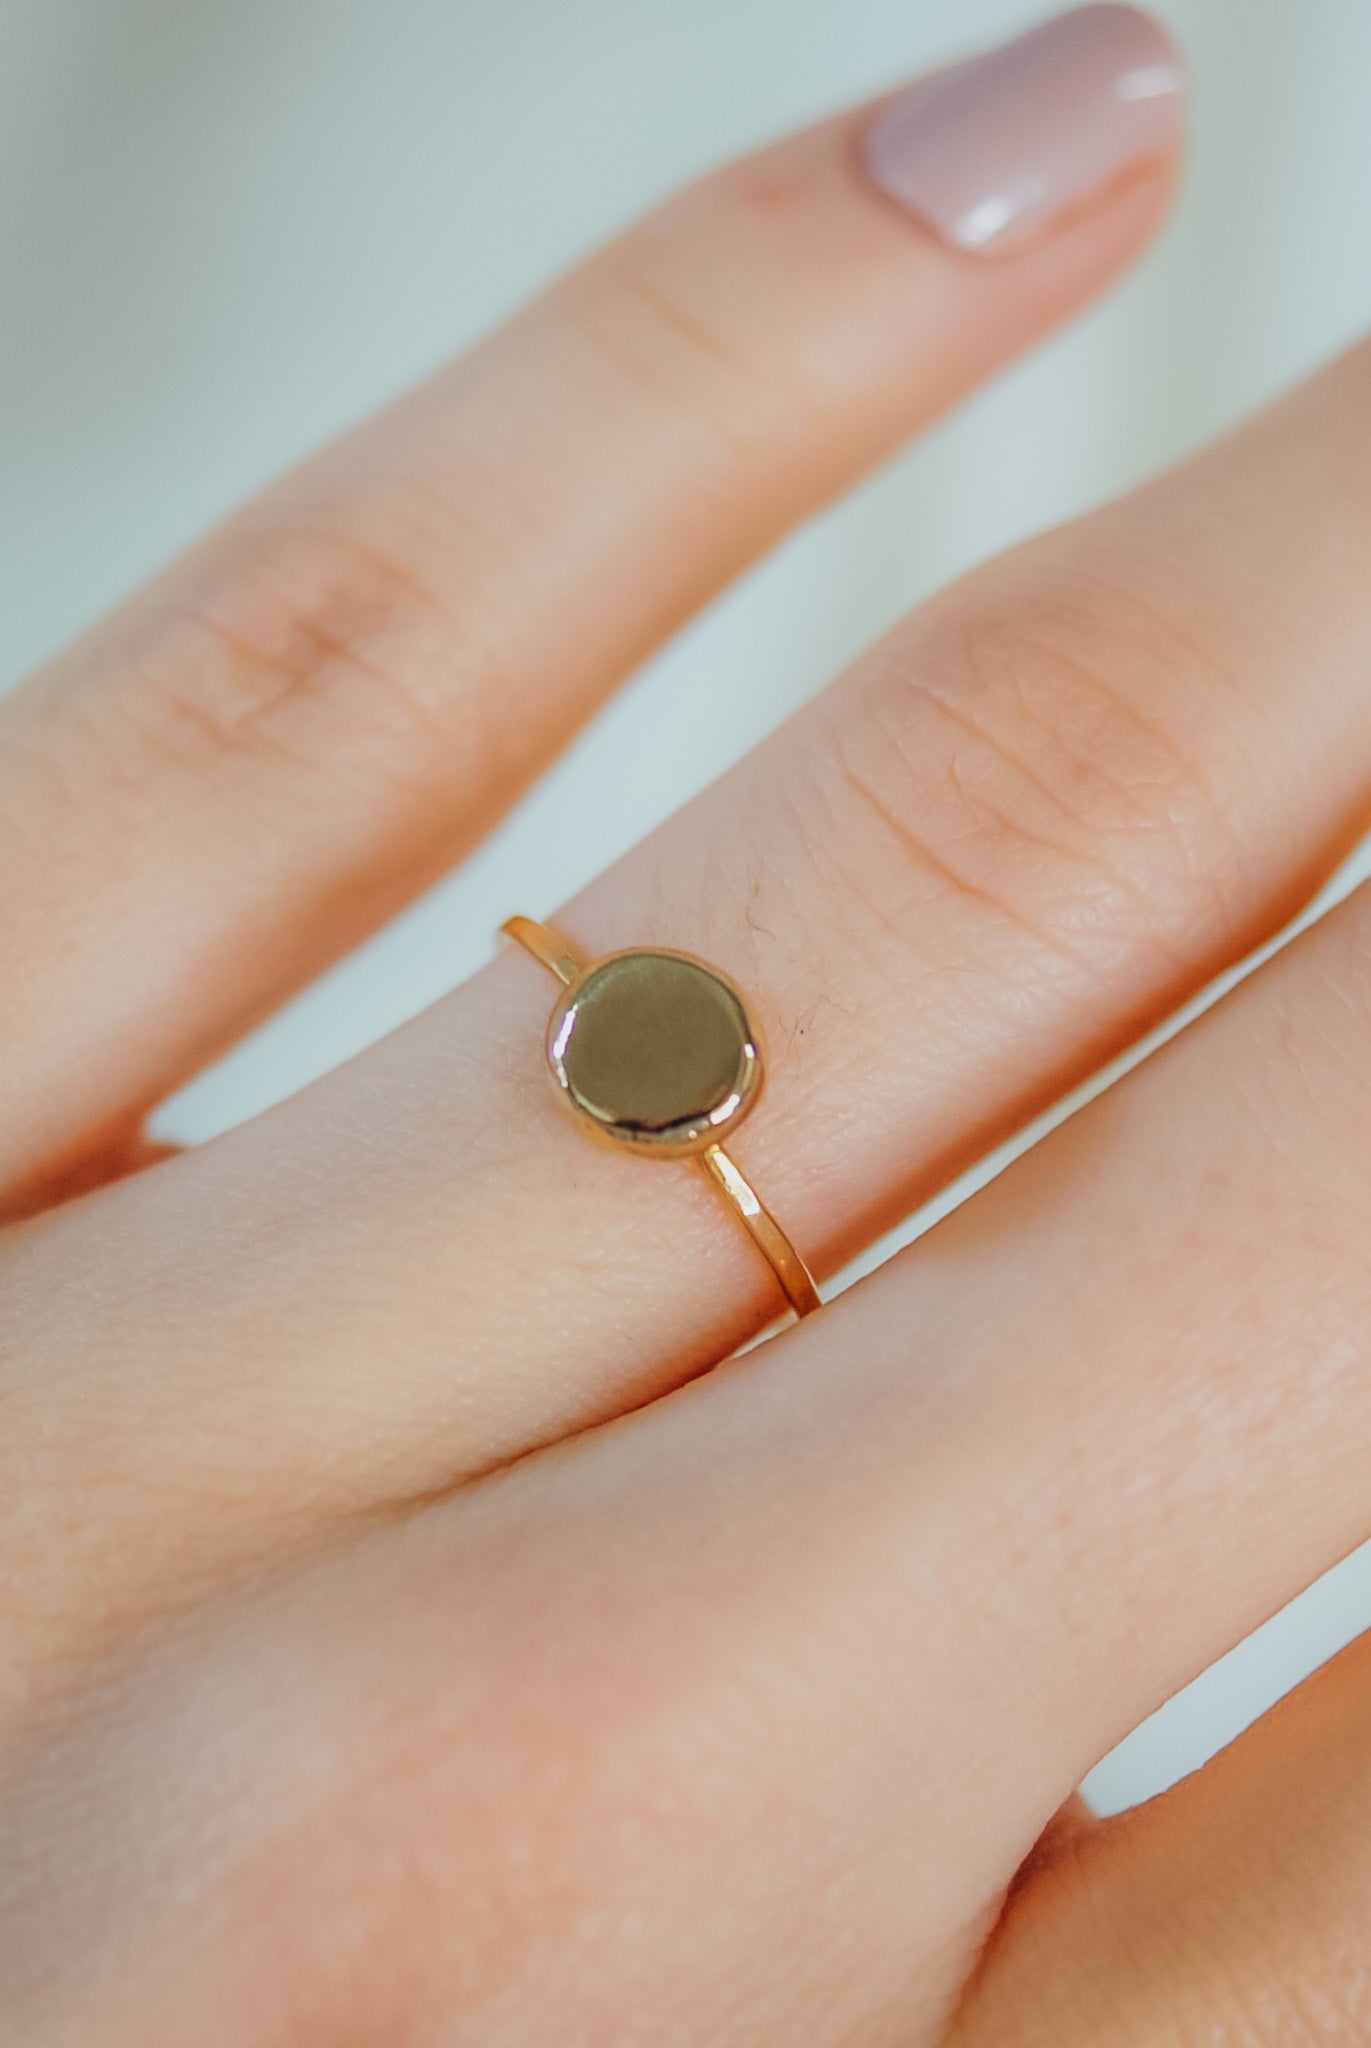 Overlap Teardrop Set of 3 Stacking Rings in Solid 14K Gold, Rose Gold or Sterling Silver